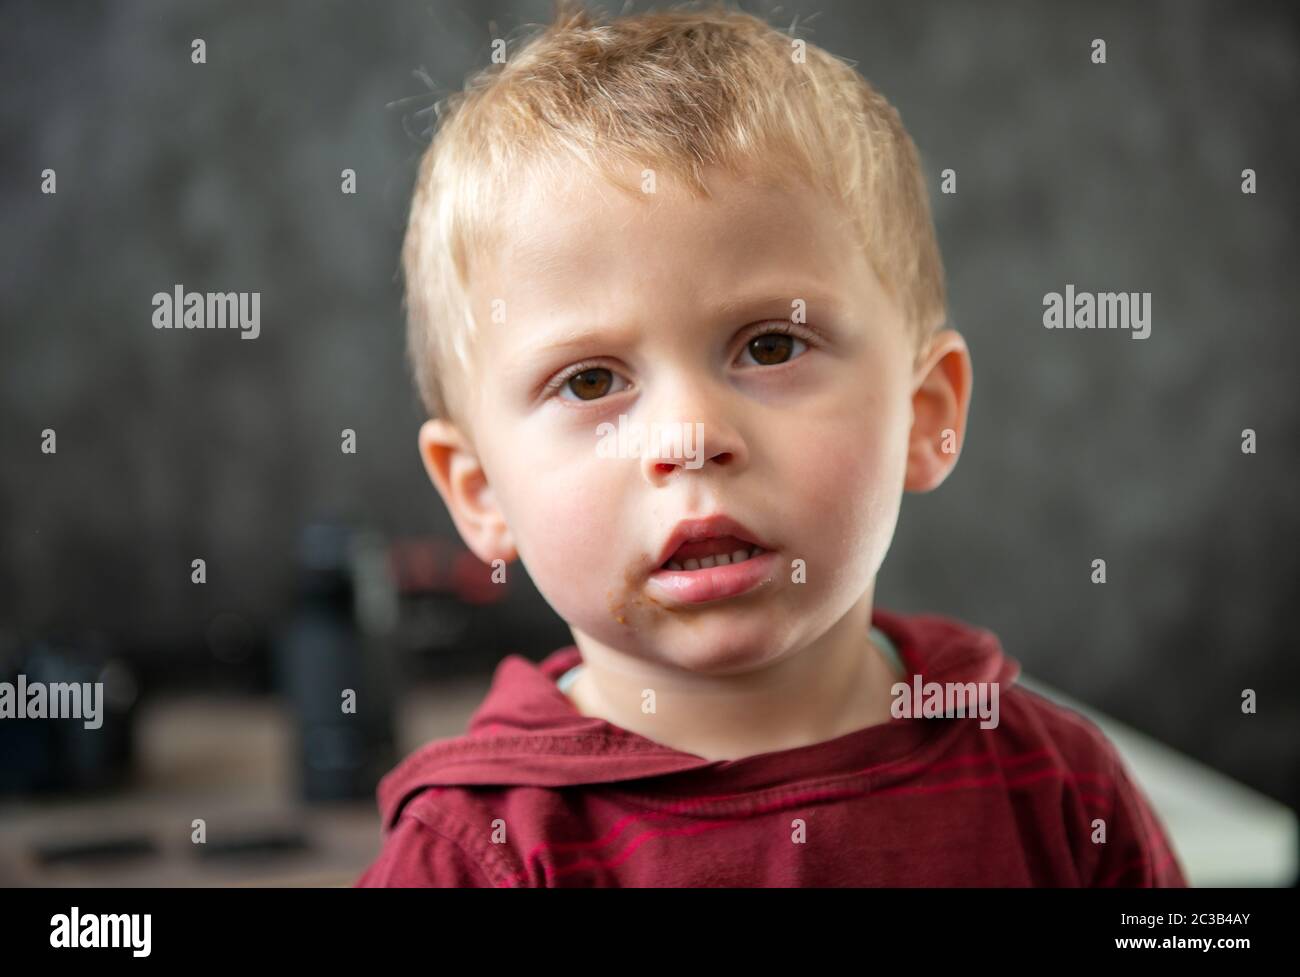 portrait of a child two years old Stock Photo